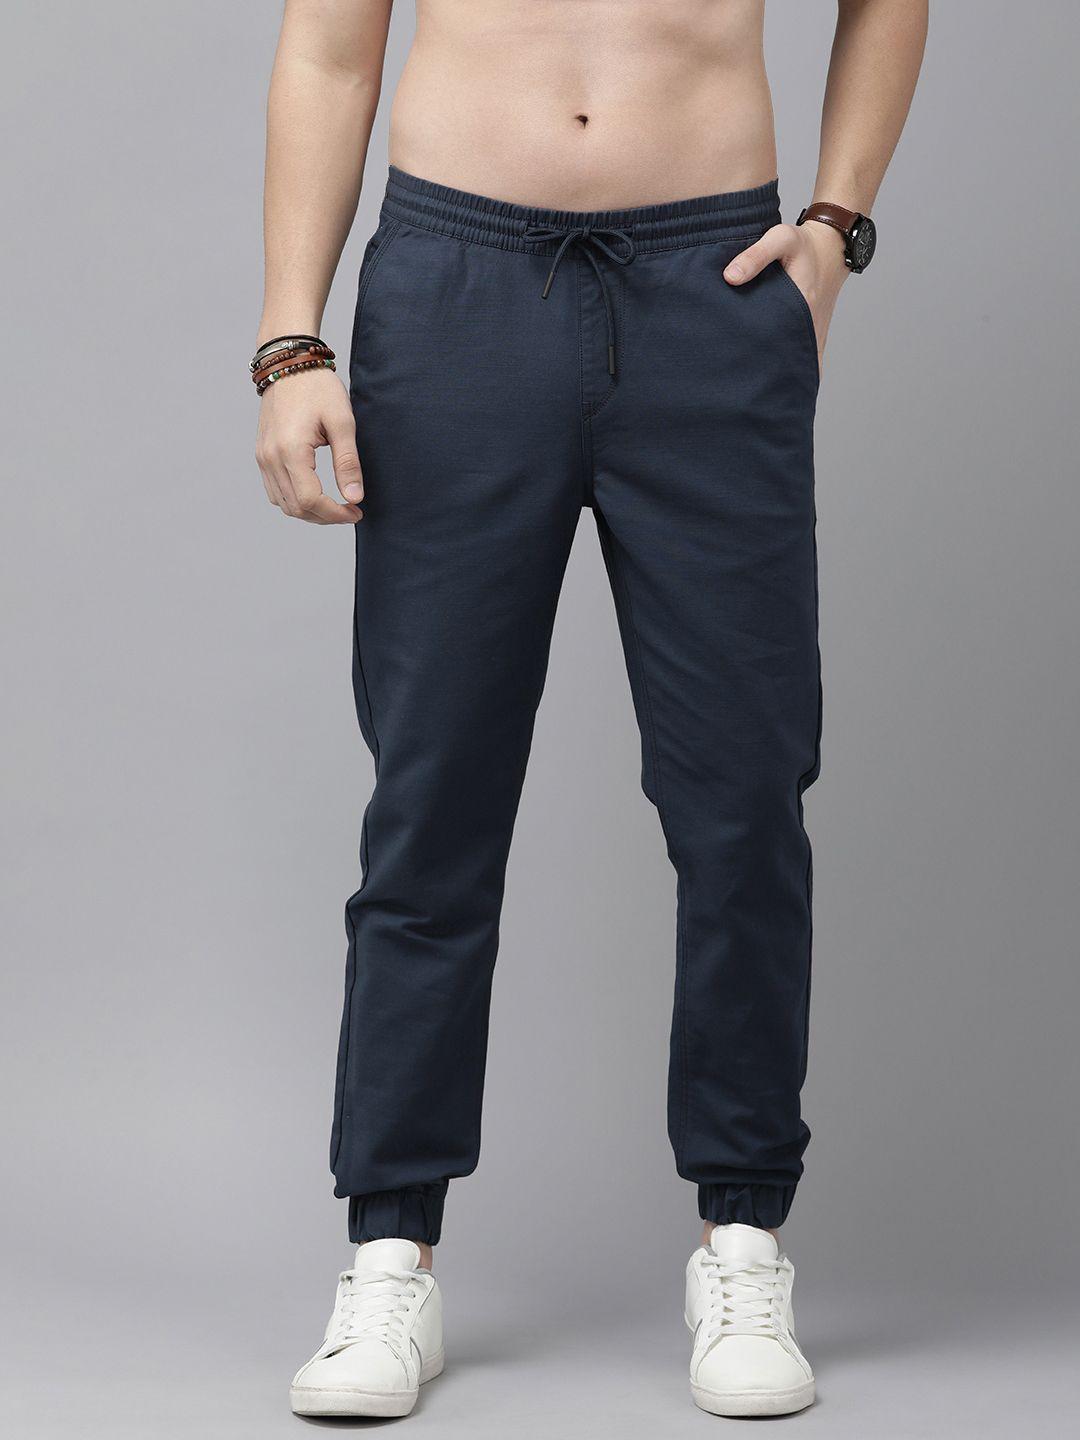 the roadster life co. men joggers trousers